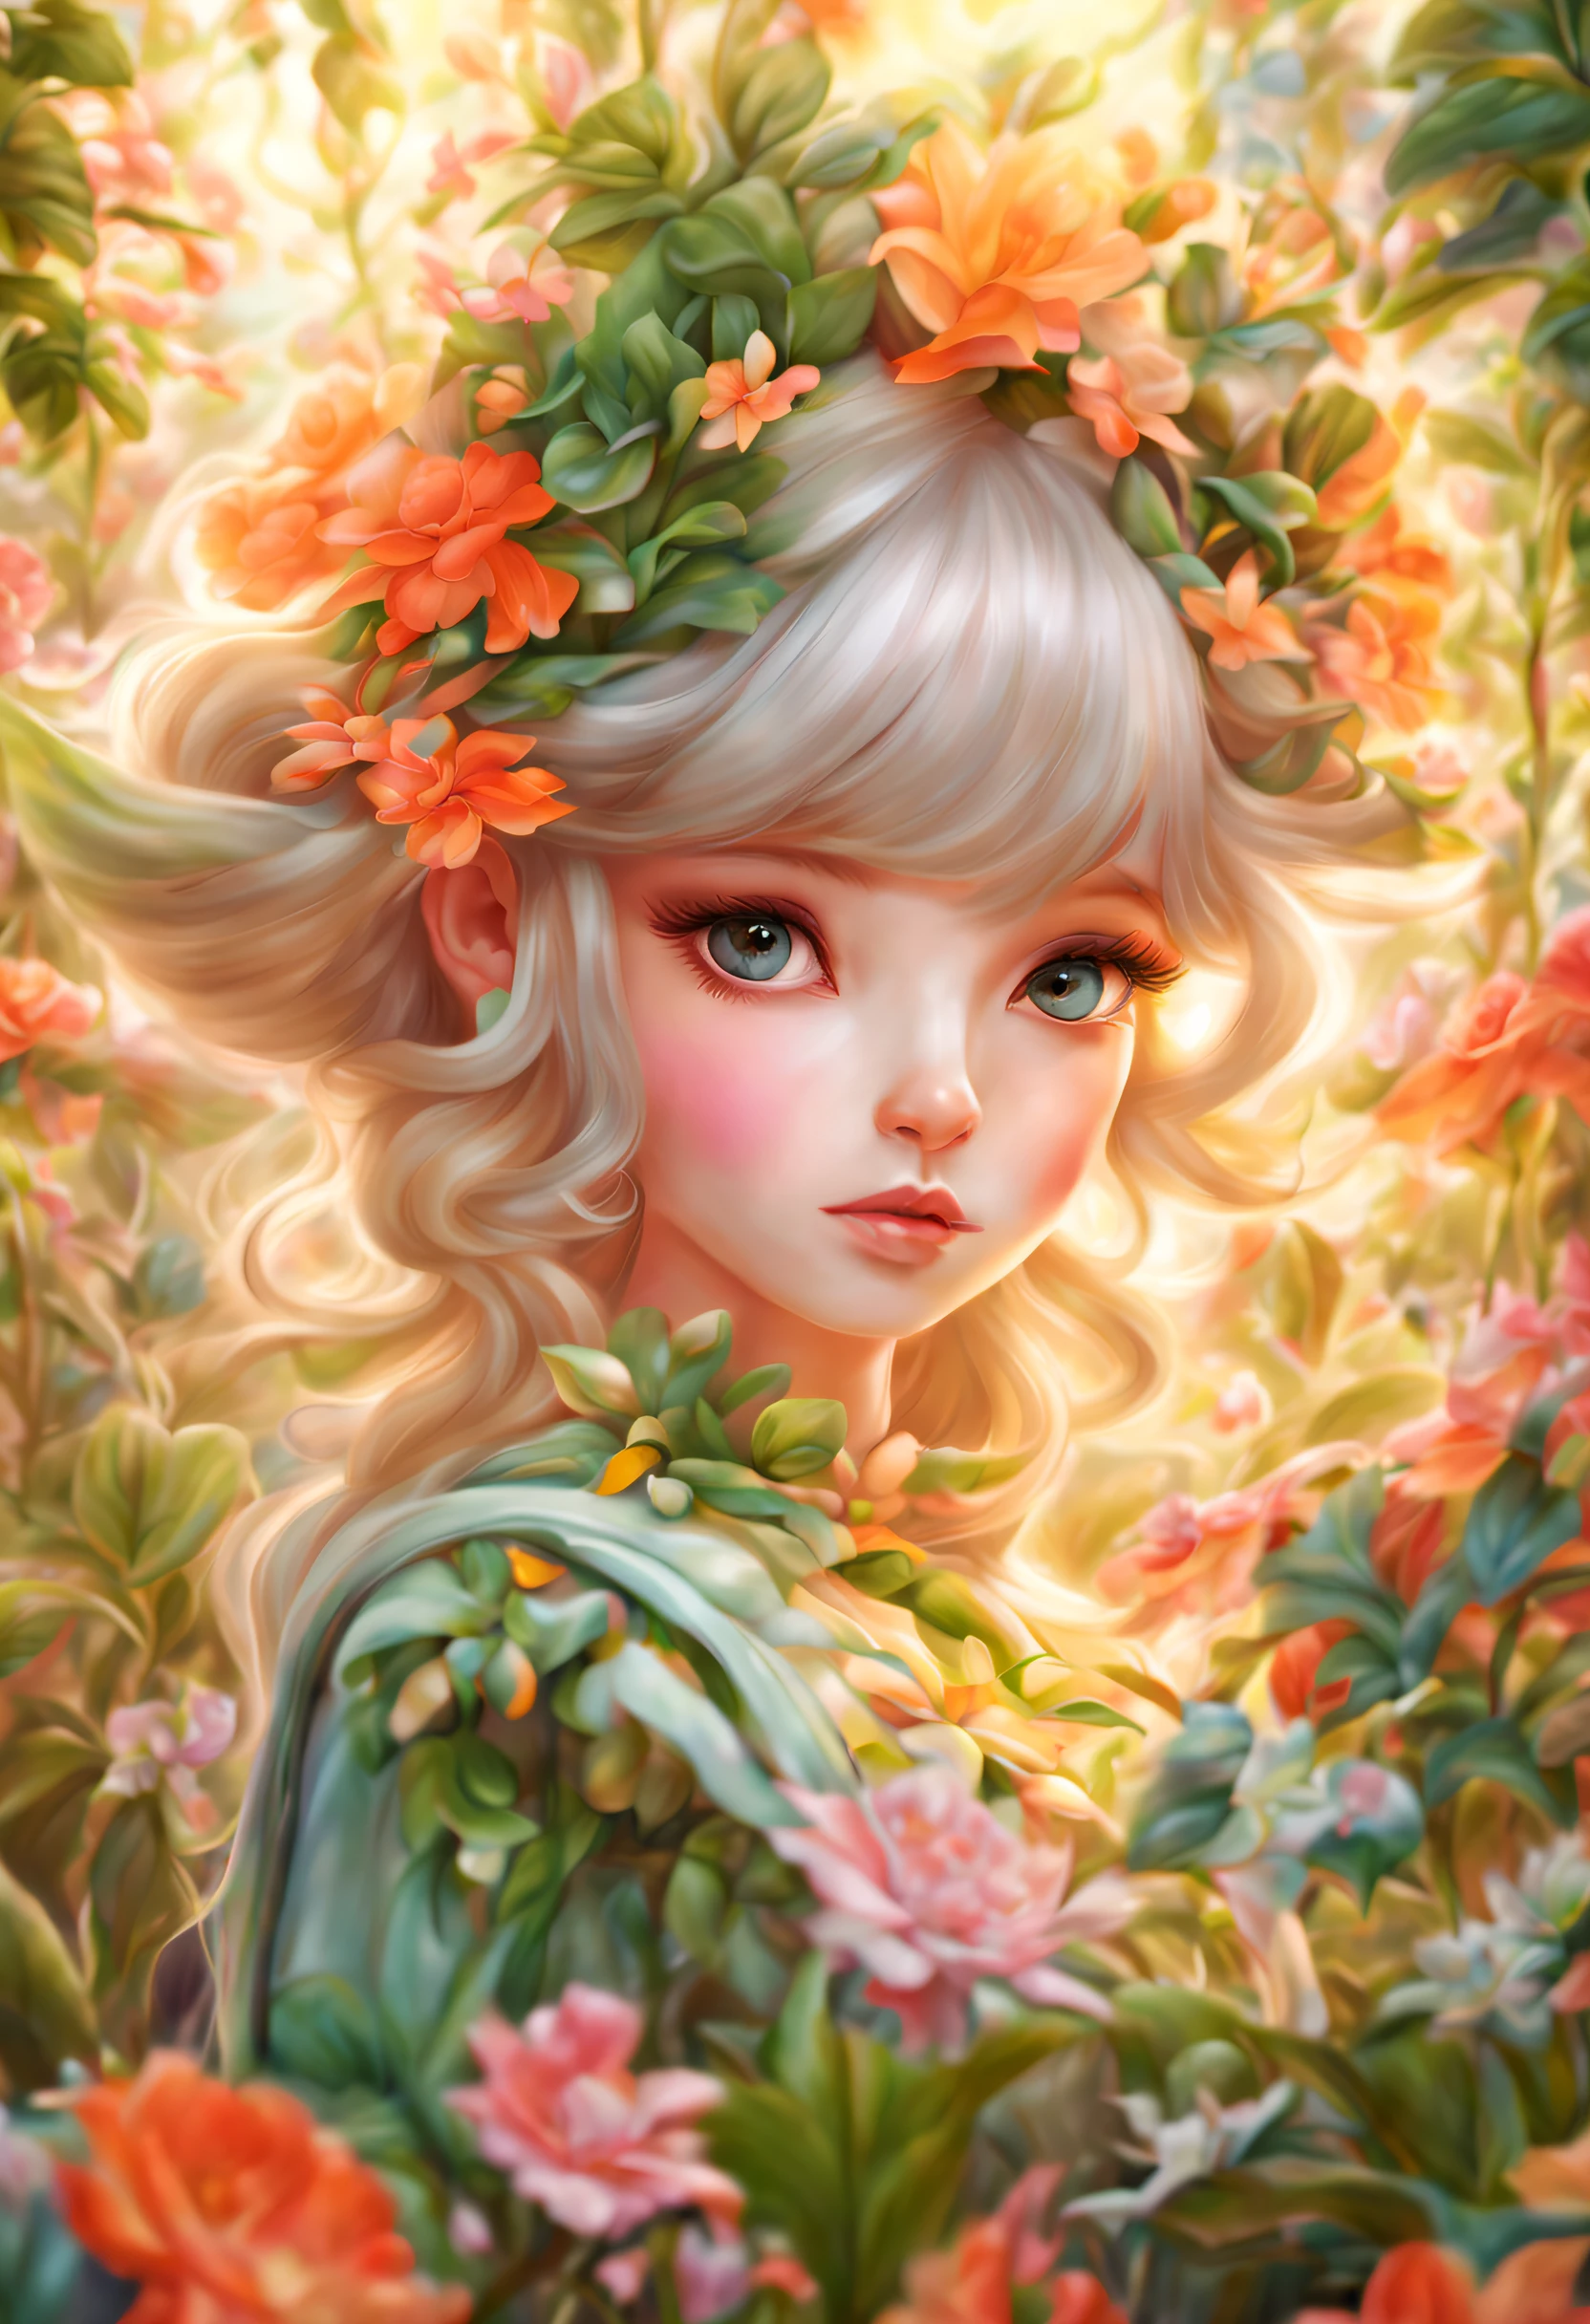 (girl-plant hybrid:1.42), a girl-plant hybrid standing in a blossoming garden, with beautiful detailed eyes, long eyelashes, and captivating gaze. The garden is lush and vibrant, with colorful flowers blooming all around. The artwork is rendered in a medium that combines digital painting and photography, creating a dreamlike and ethereal feel. The image quality is of the best quality, with ultra-detailed and realistic features. The artwork showcases a unique fusion of portrait and nature genres, with a soft and warm color palette.